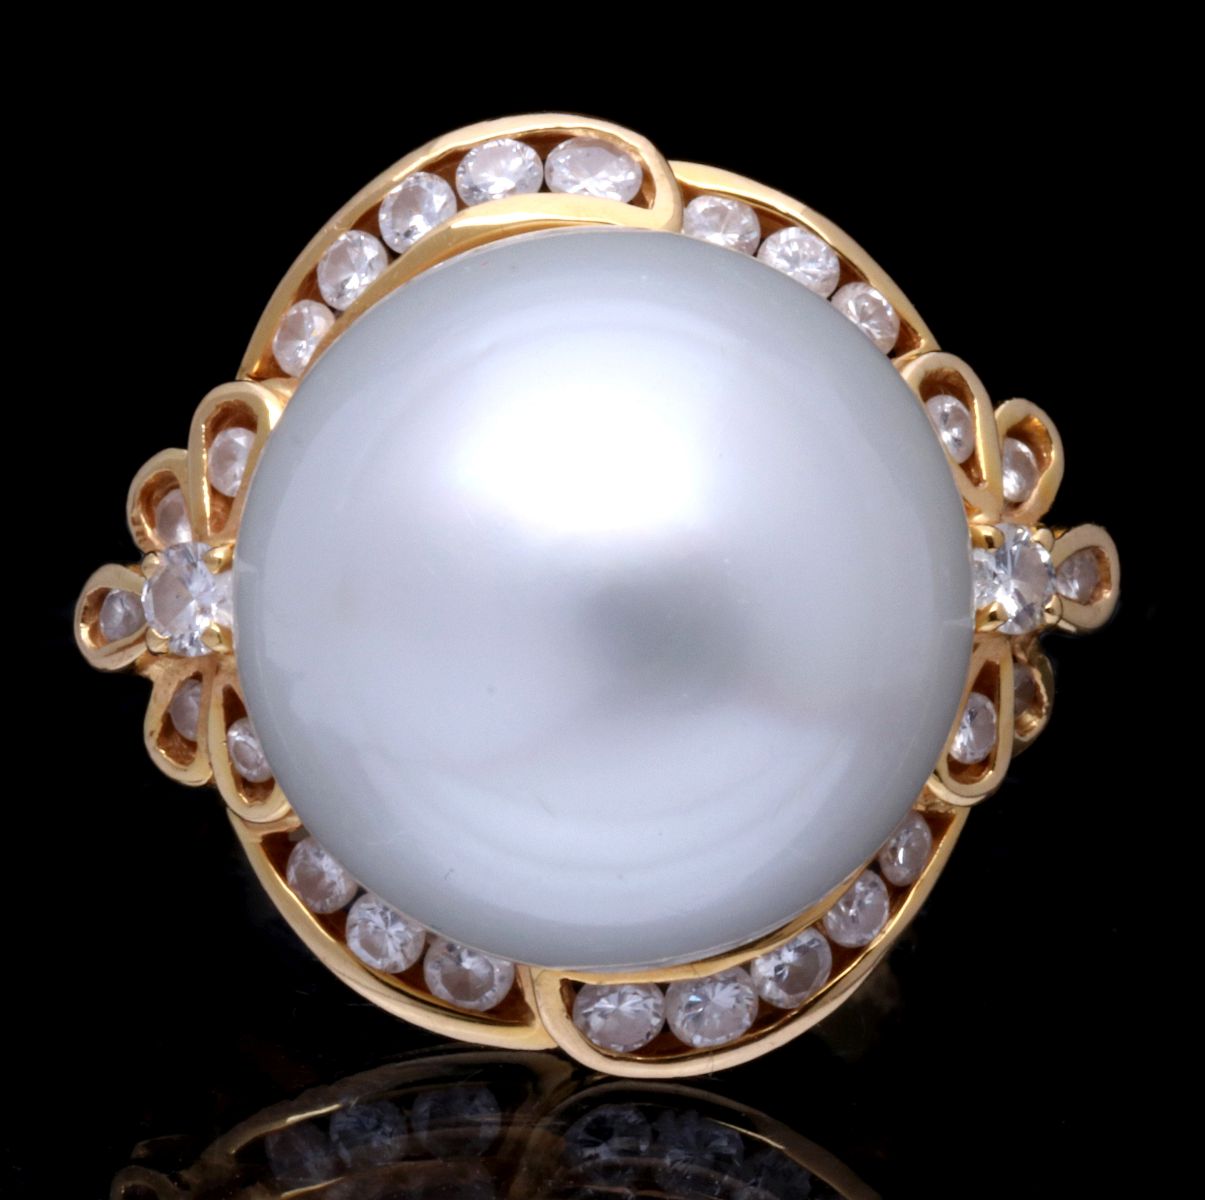 AN 18K GOLD AND DIAMOND RING WITH MABE PEARL